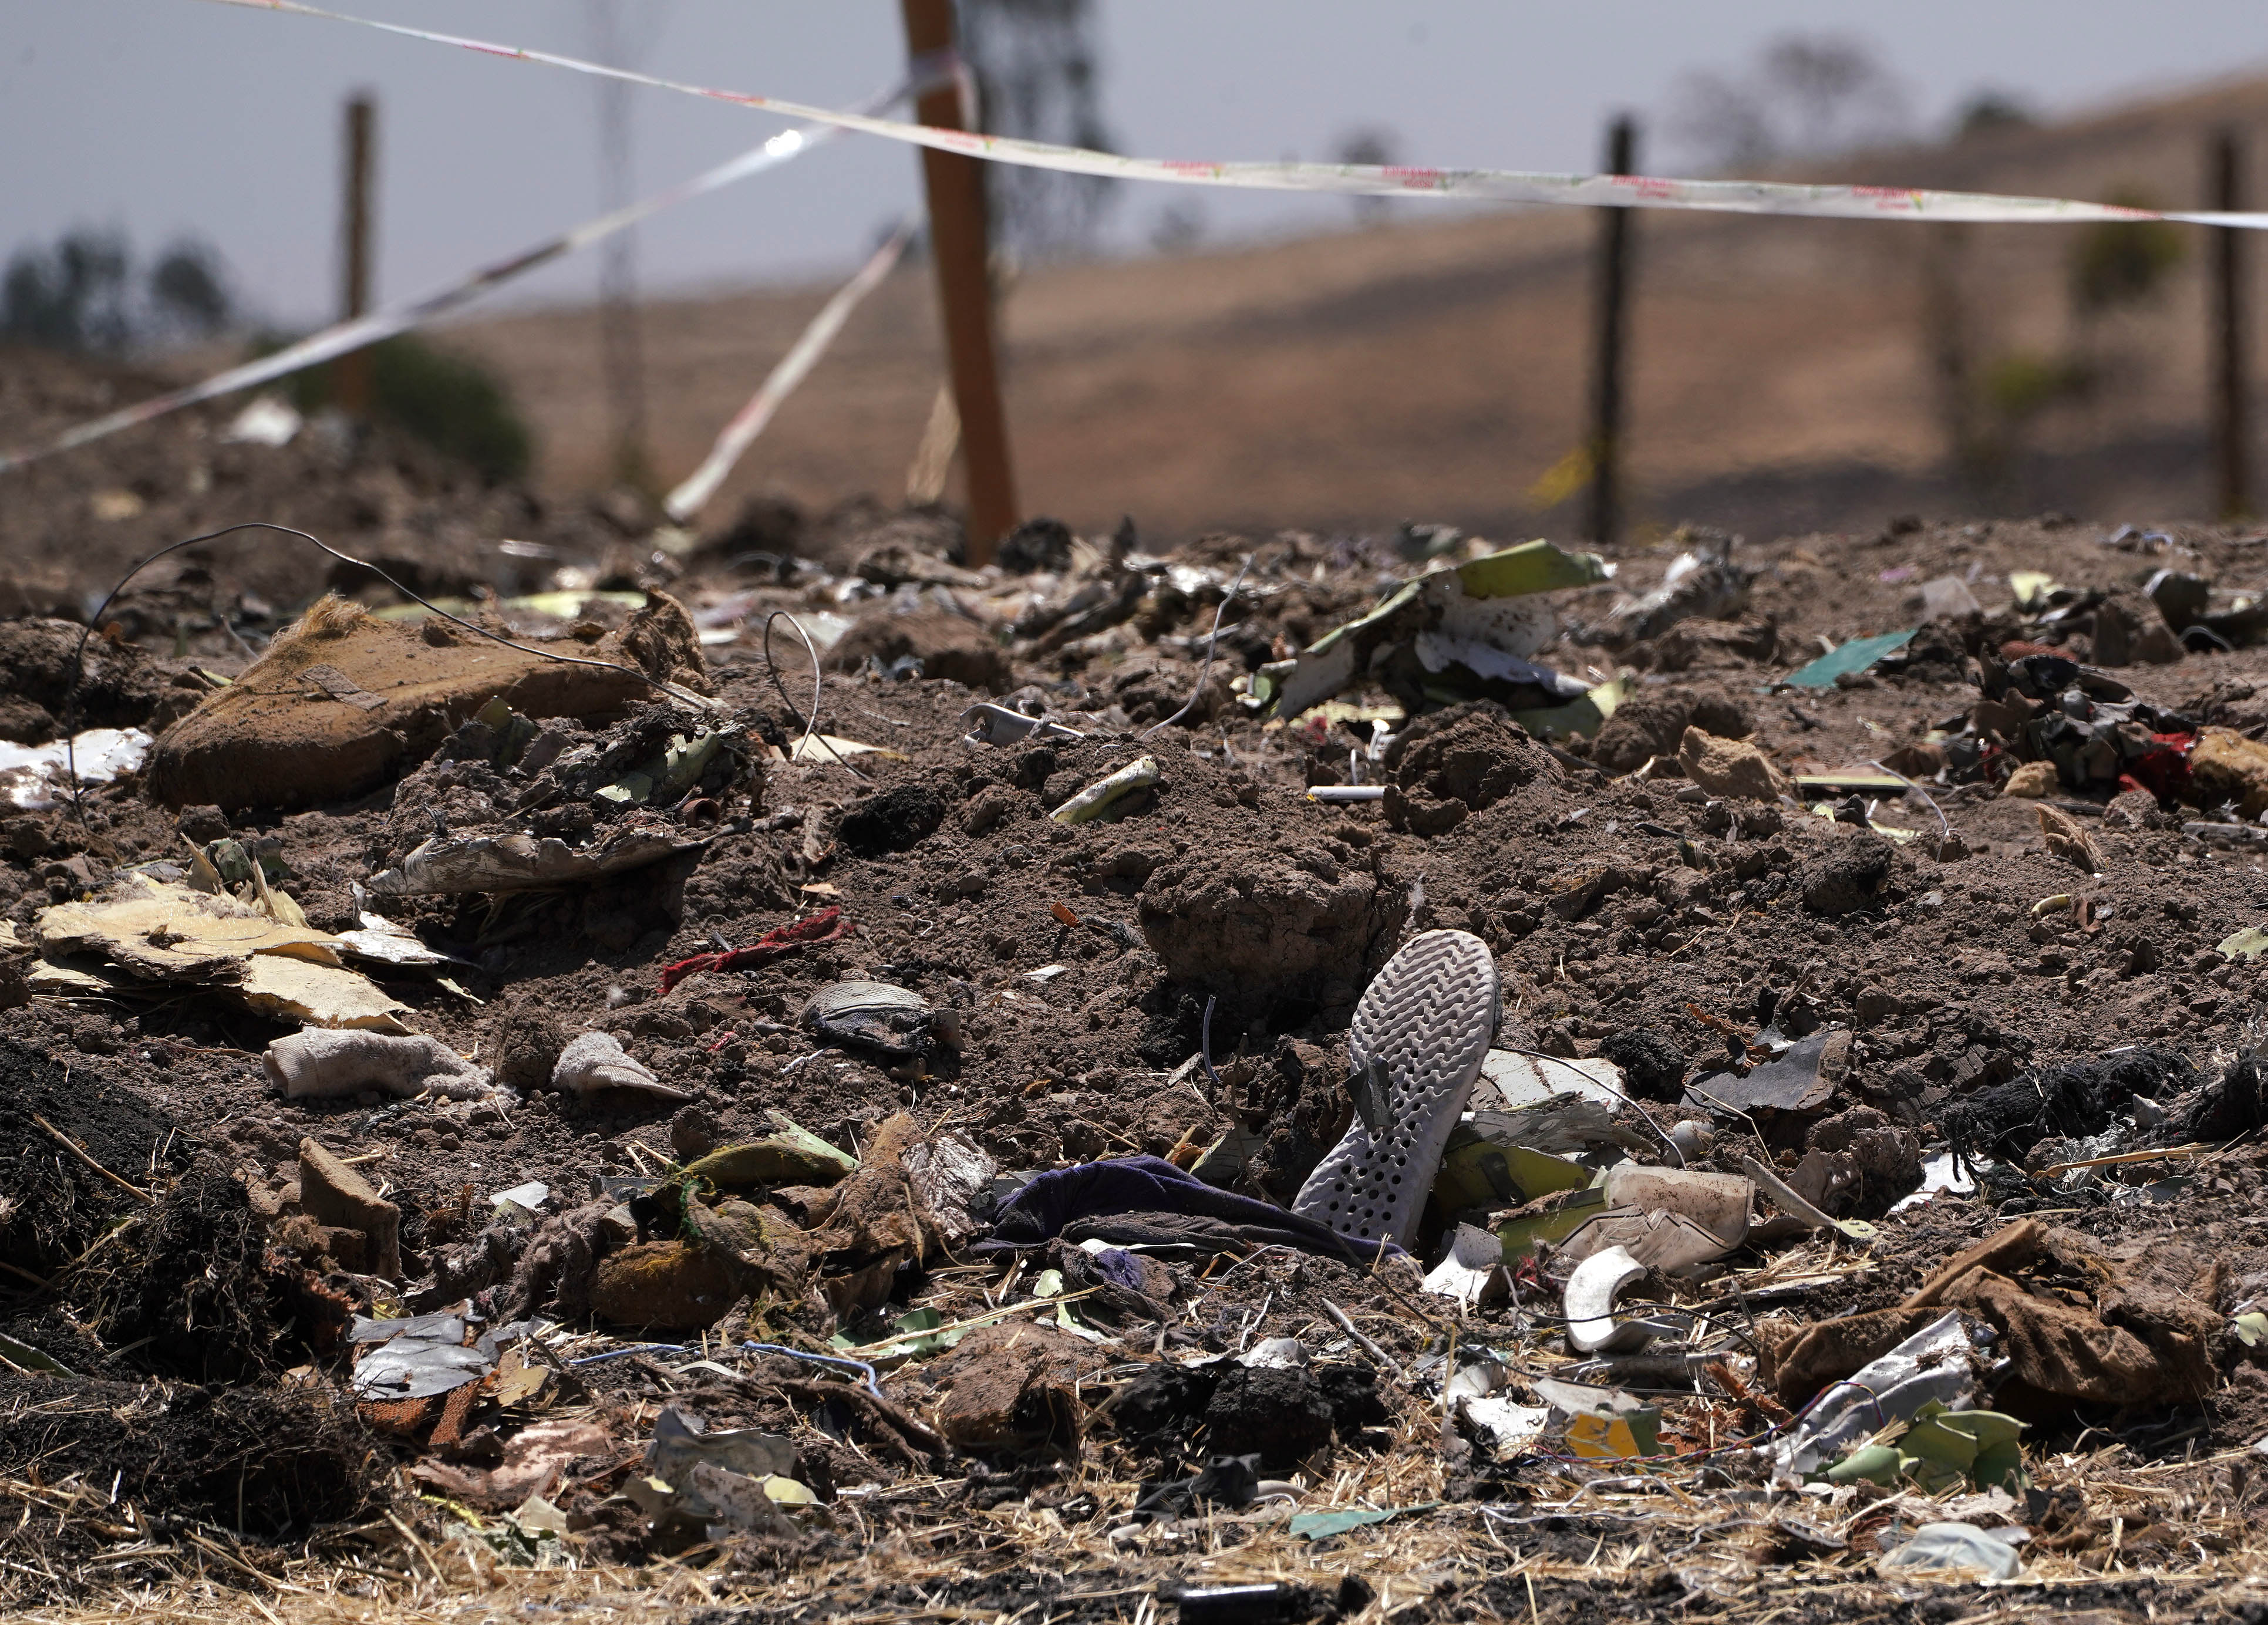 A shoe rests amidst other debris just outside the crater where Ethiopian Airlines flight ET302 crashed on March 10, 2019. (Photo by Jemal Countess/Getty Images)